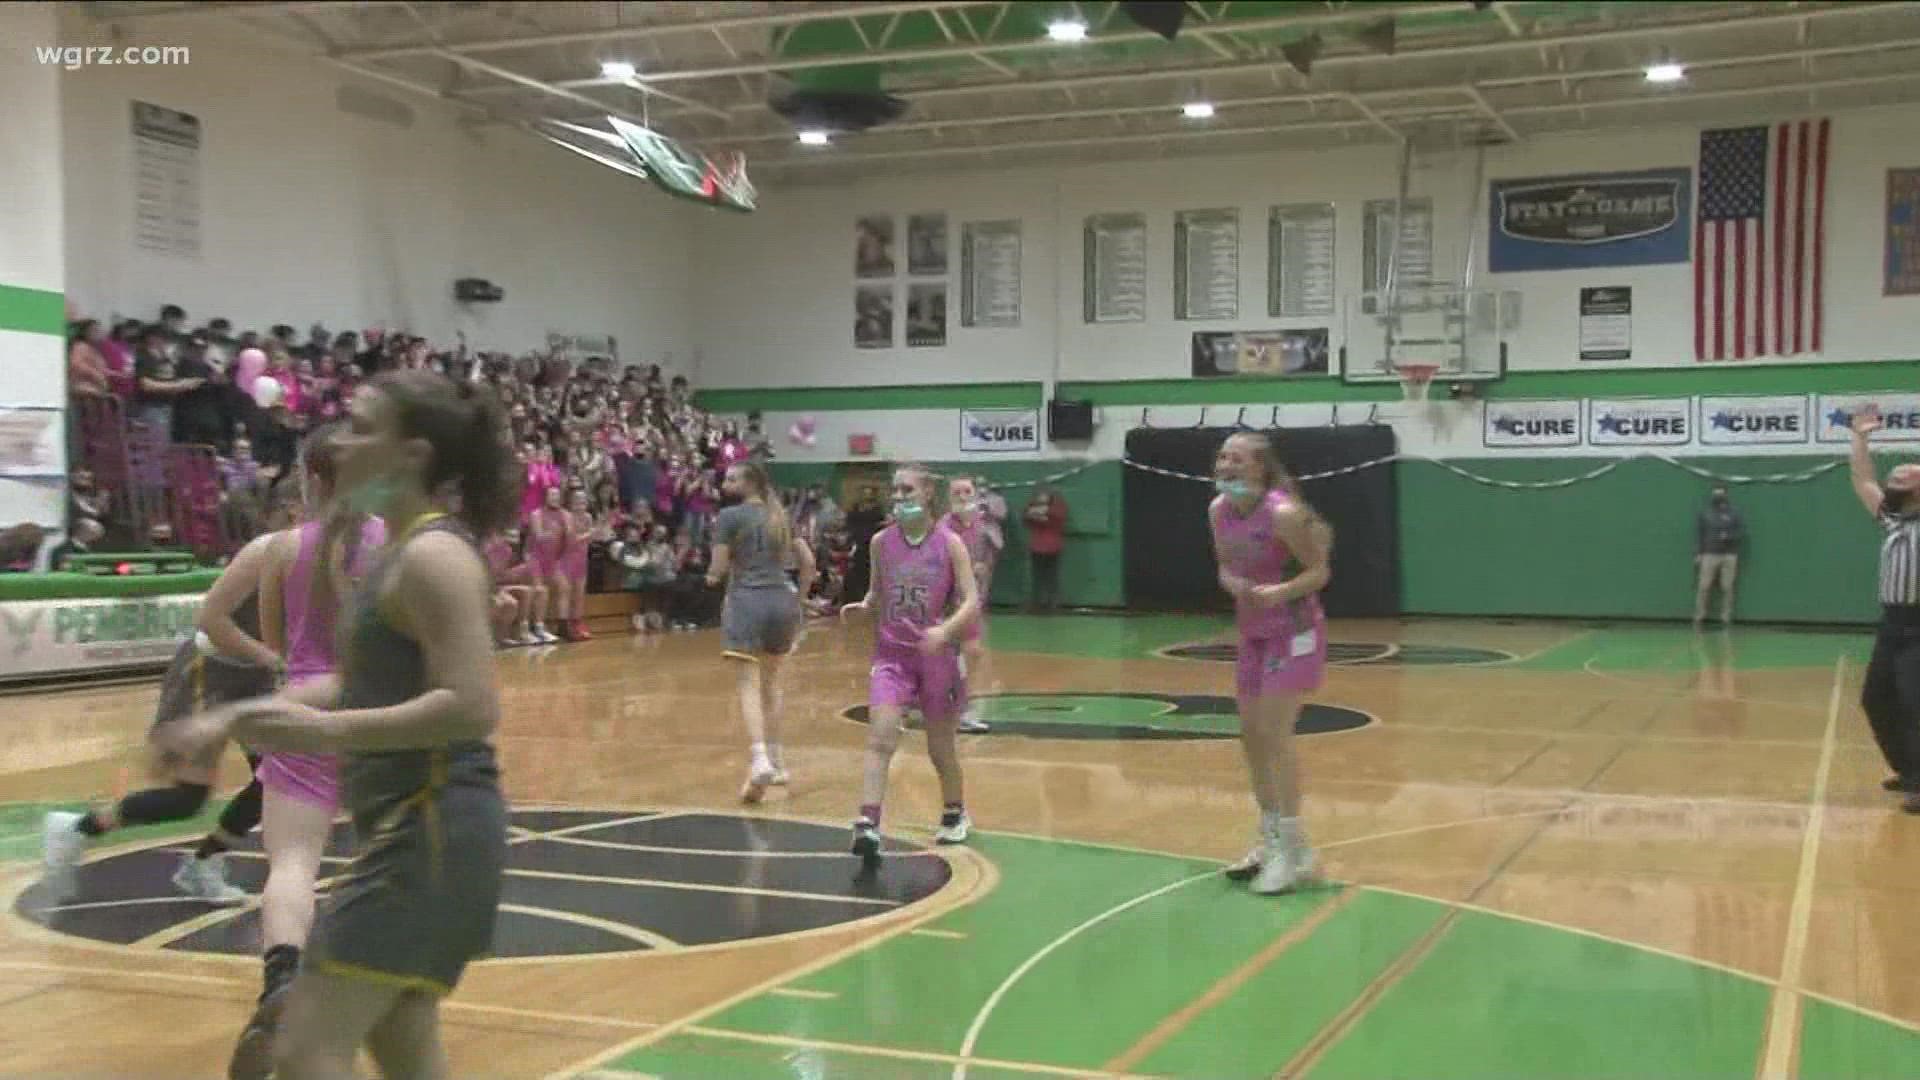 The Pembroke girls basketball team  was taking on their rival, "Oakfield-Alabama" Friday night, all to support Roswell Park Comprehensive Cancer Center.